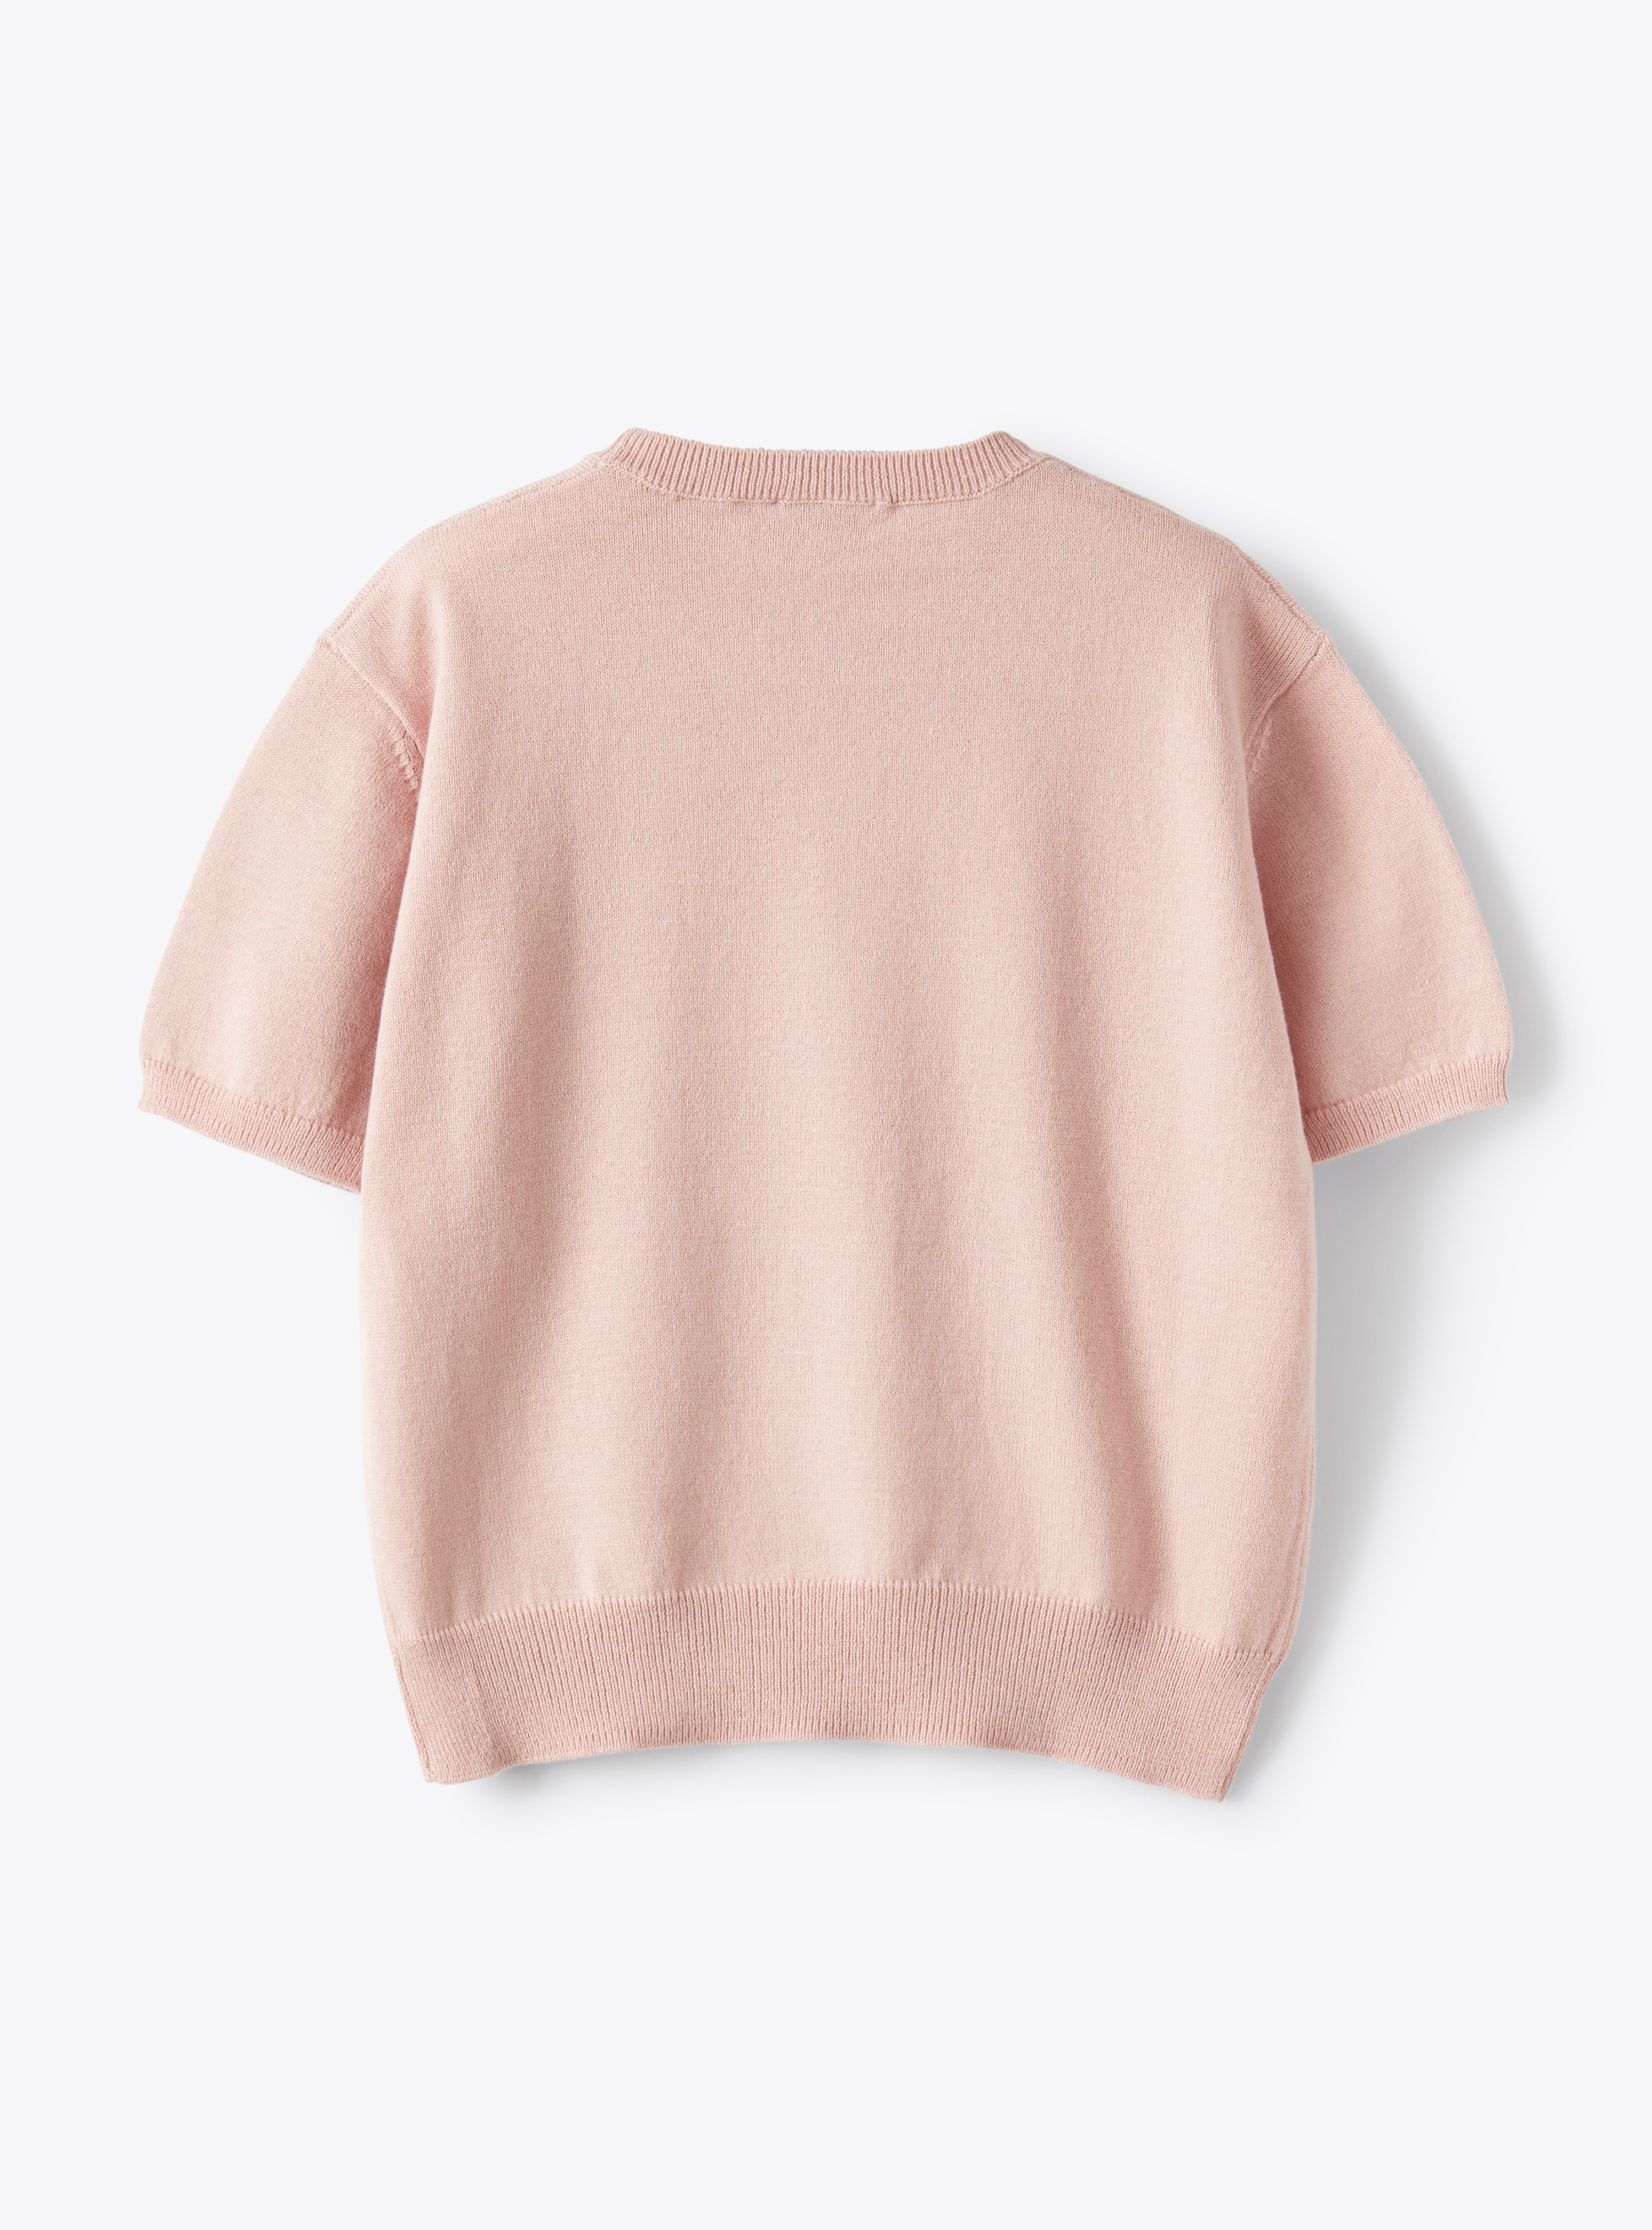 Short-sleeve unisex sweater in pepper-pink organic cotton - Pink | Il Gufo